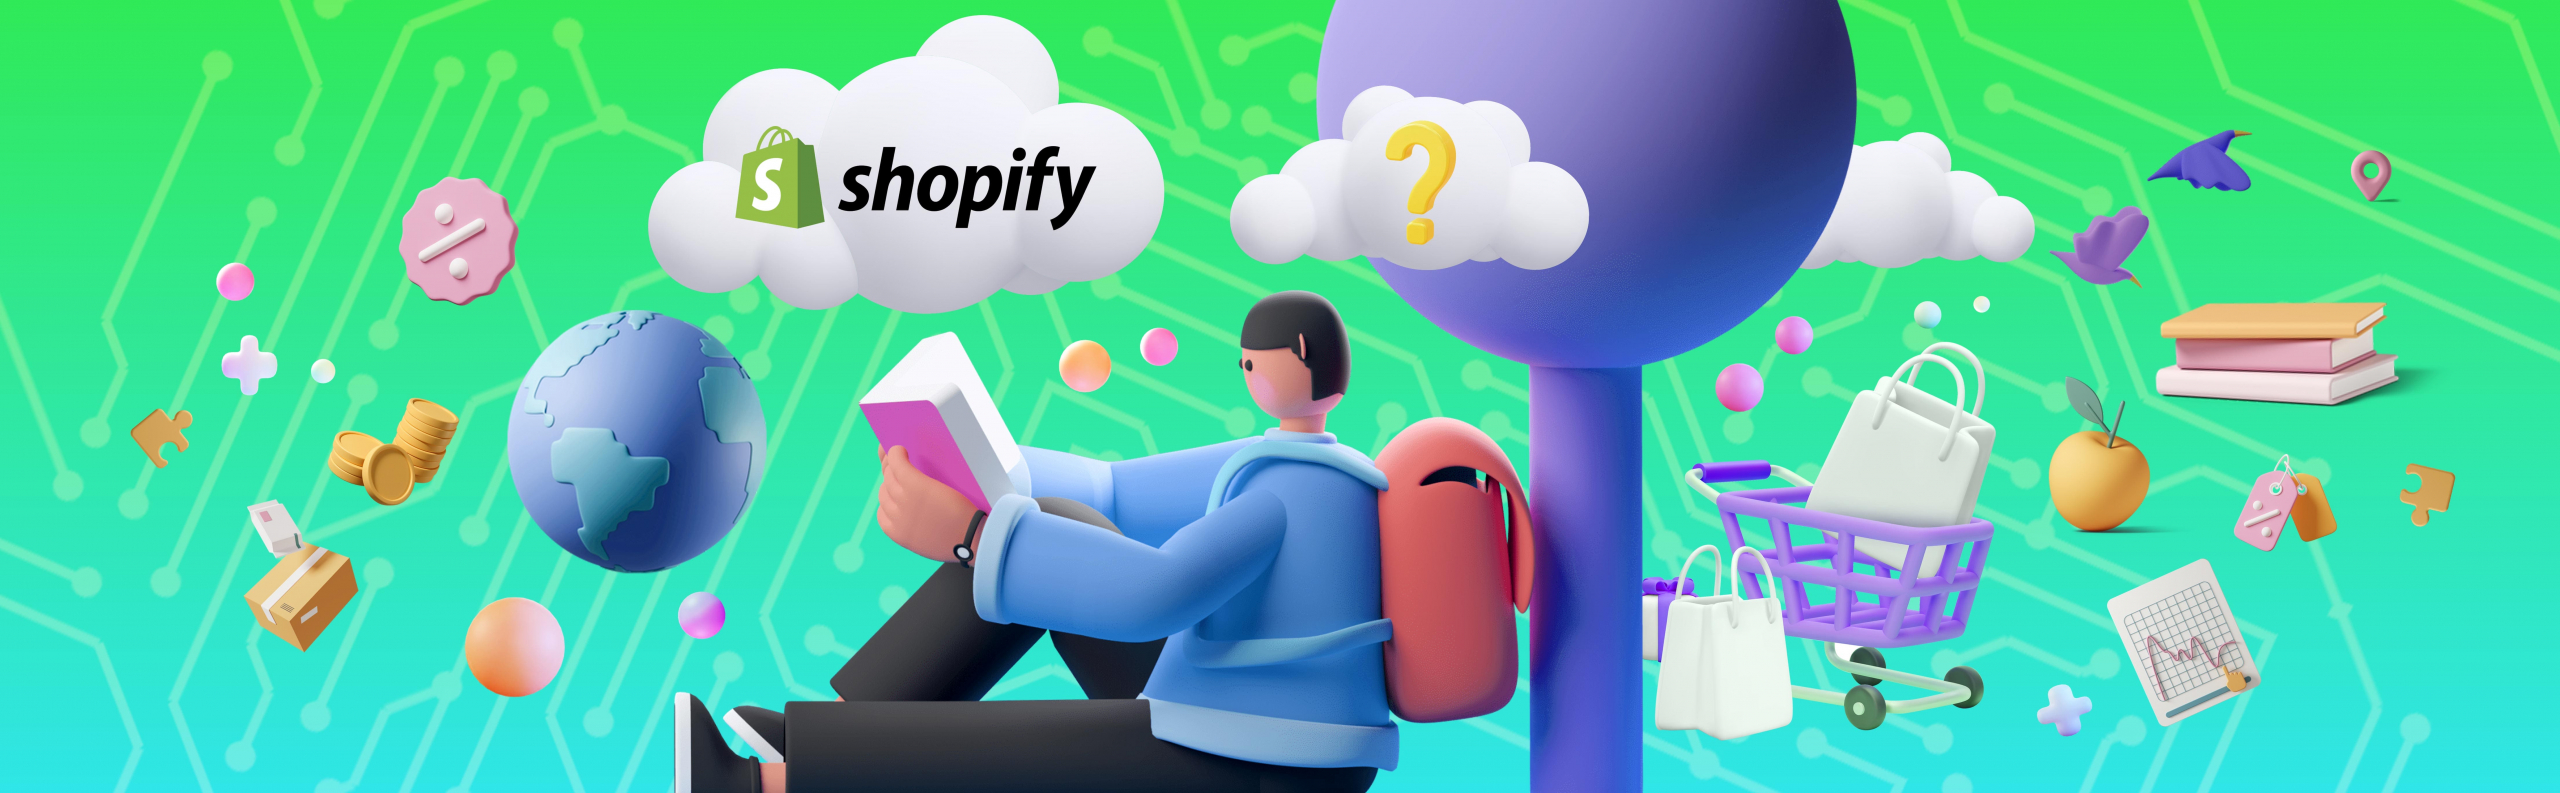 Does Shopify Have Expense Tracking?